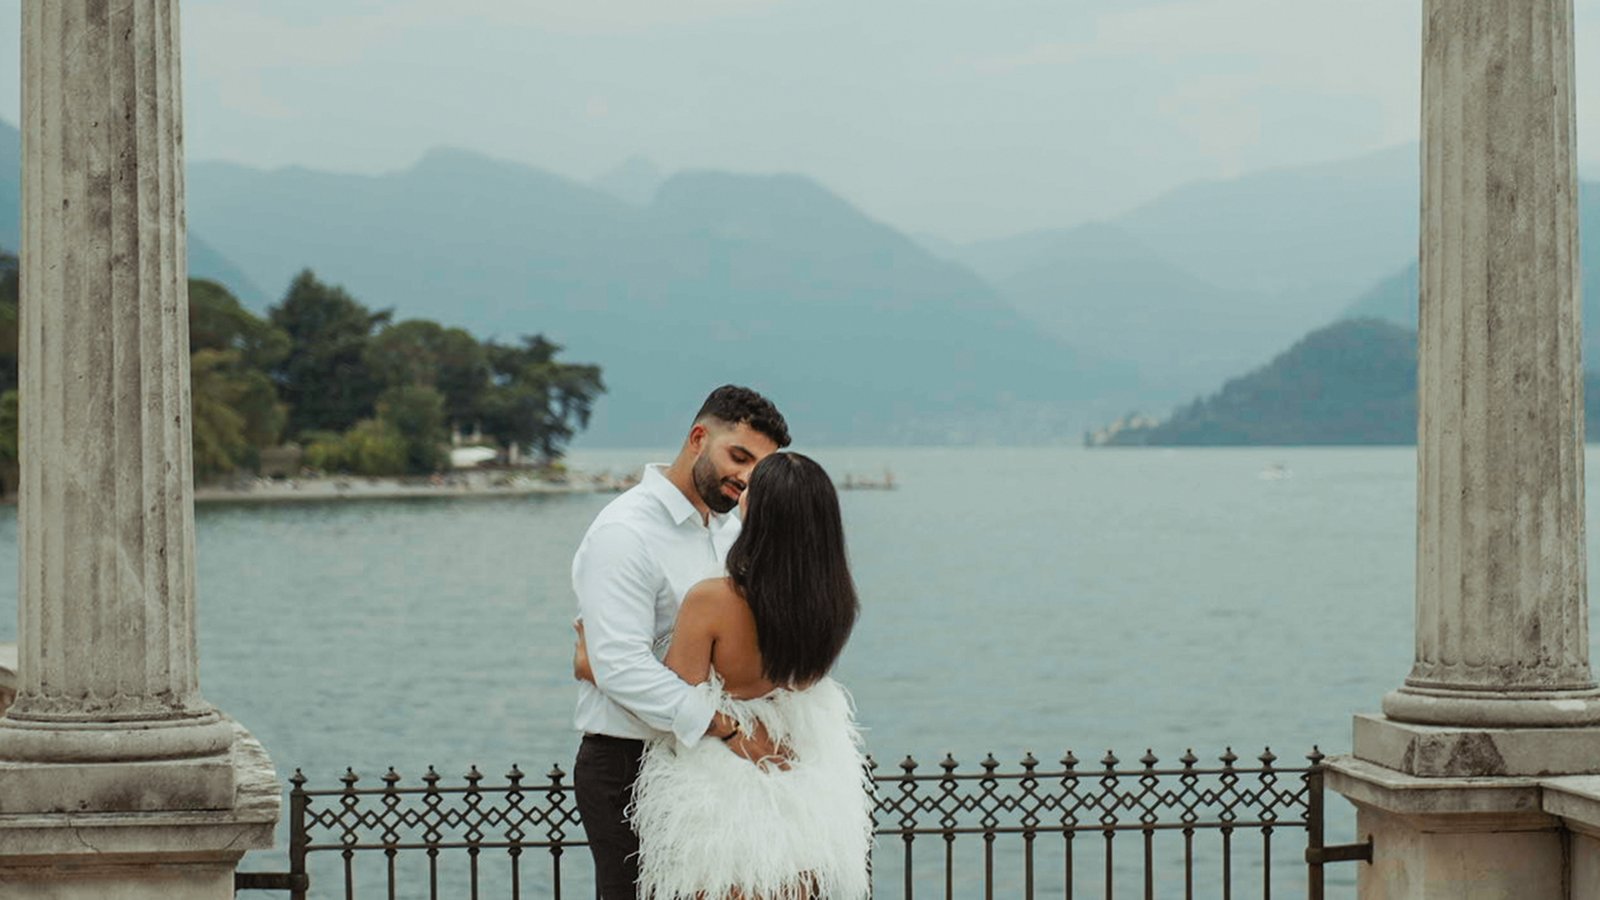 Have you thought about organizing your wedding on Lake Como?